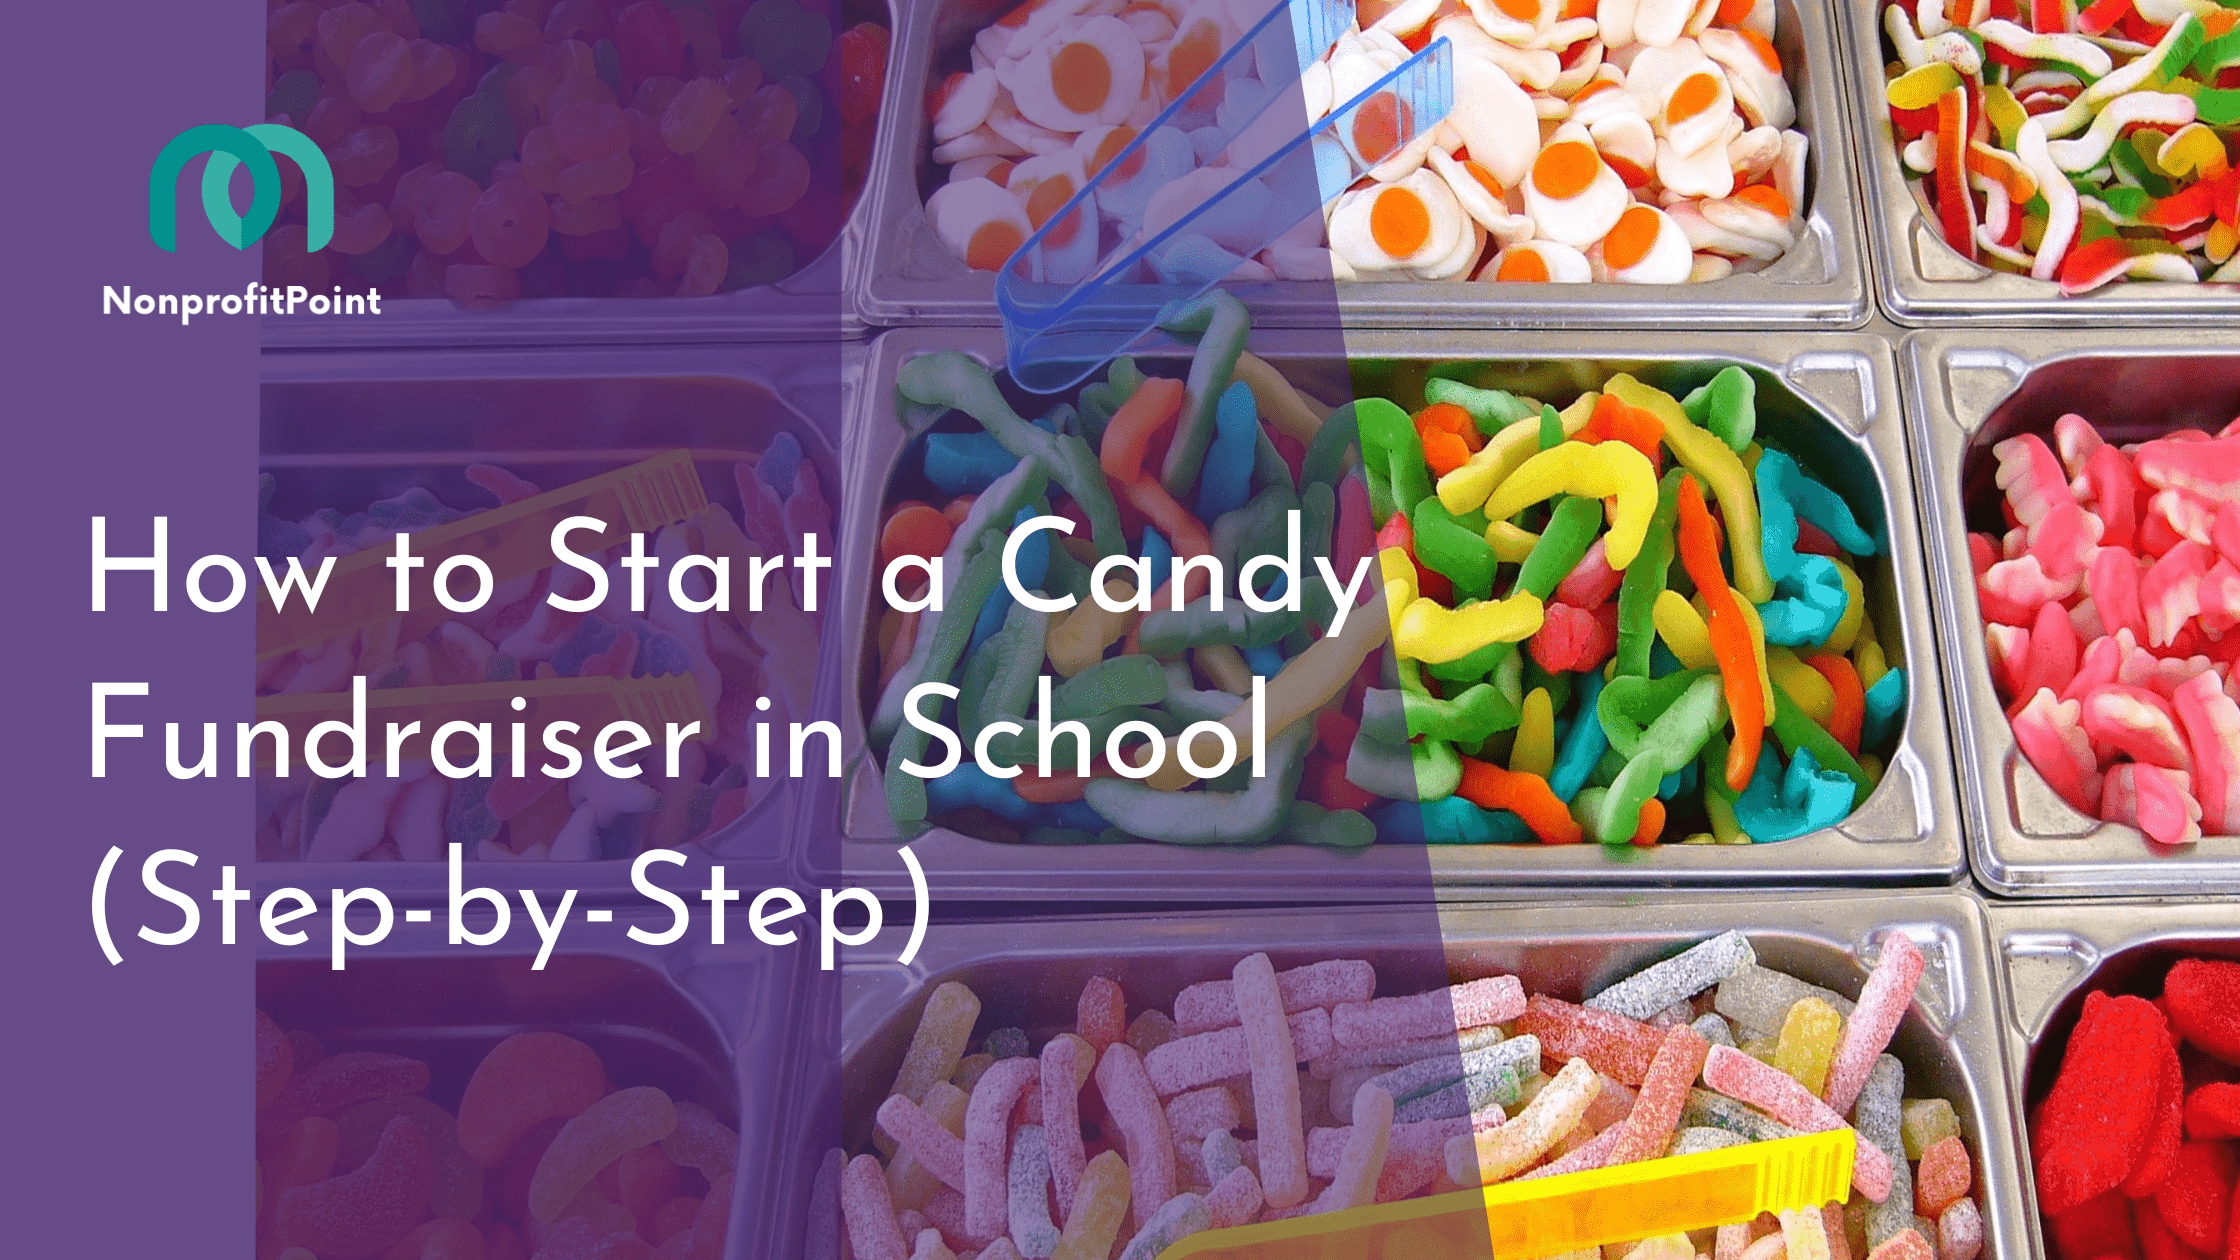 How to Start a Candy Fundraiser in School (Step-by-Step)